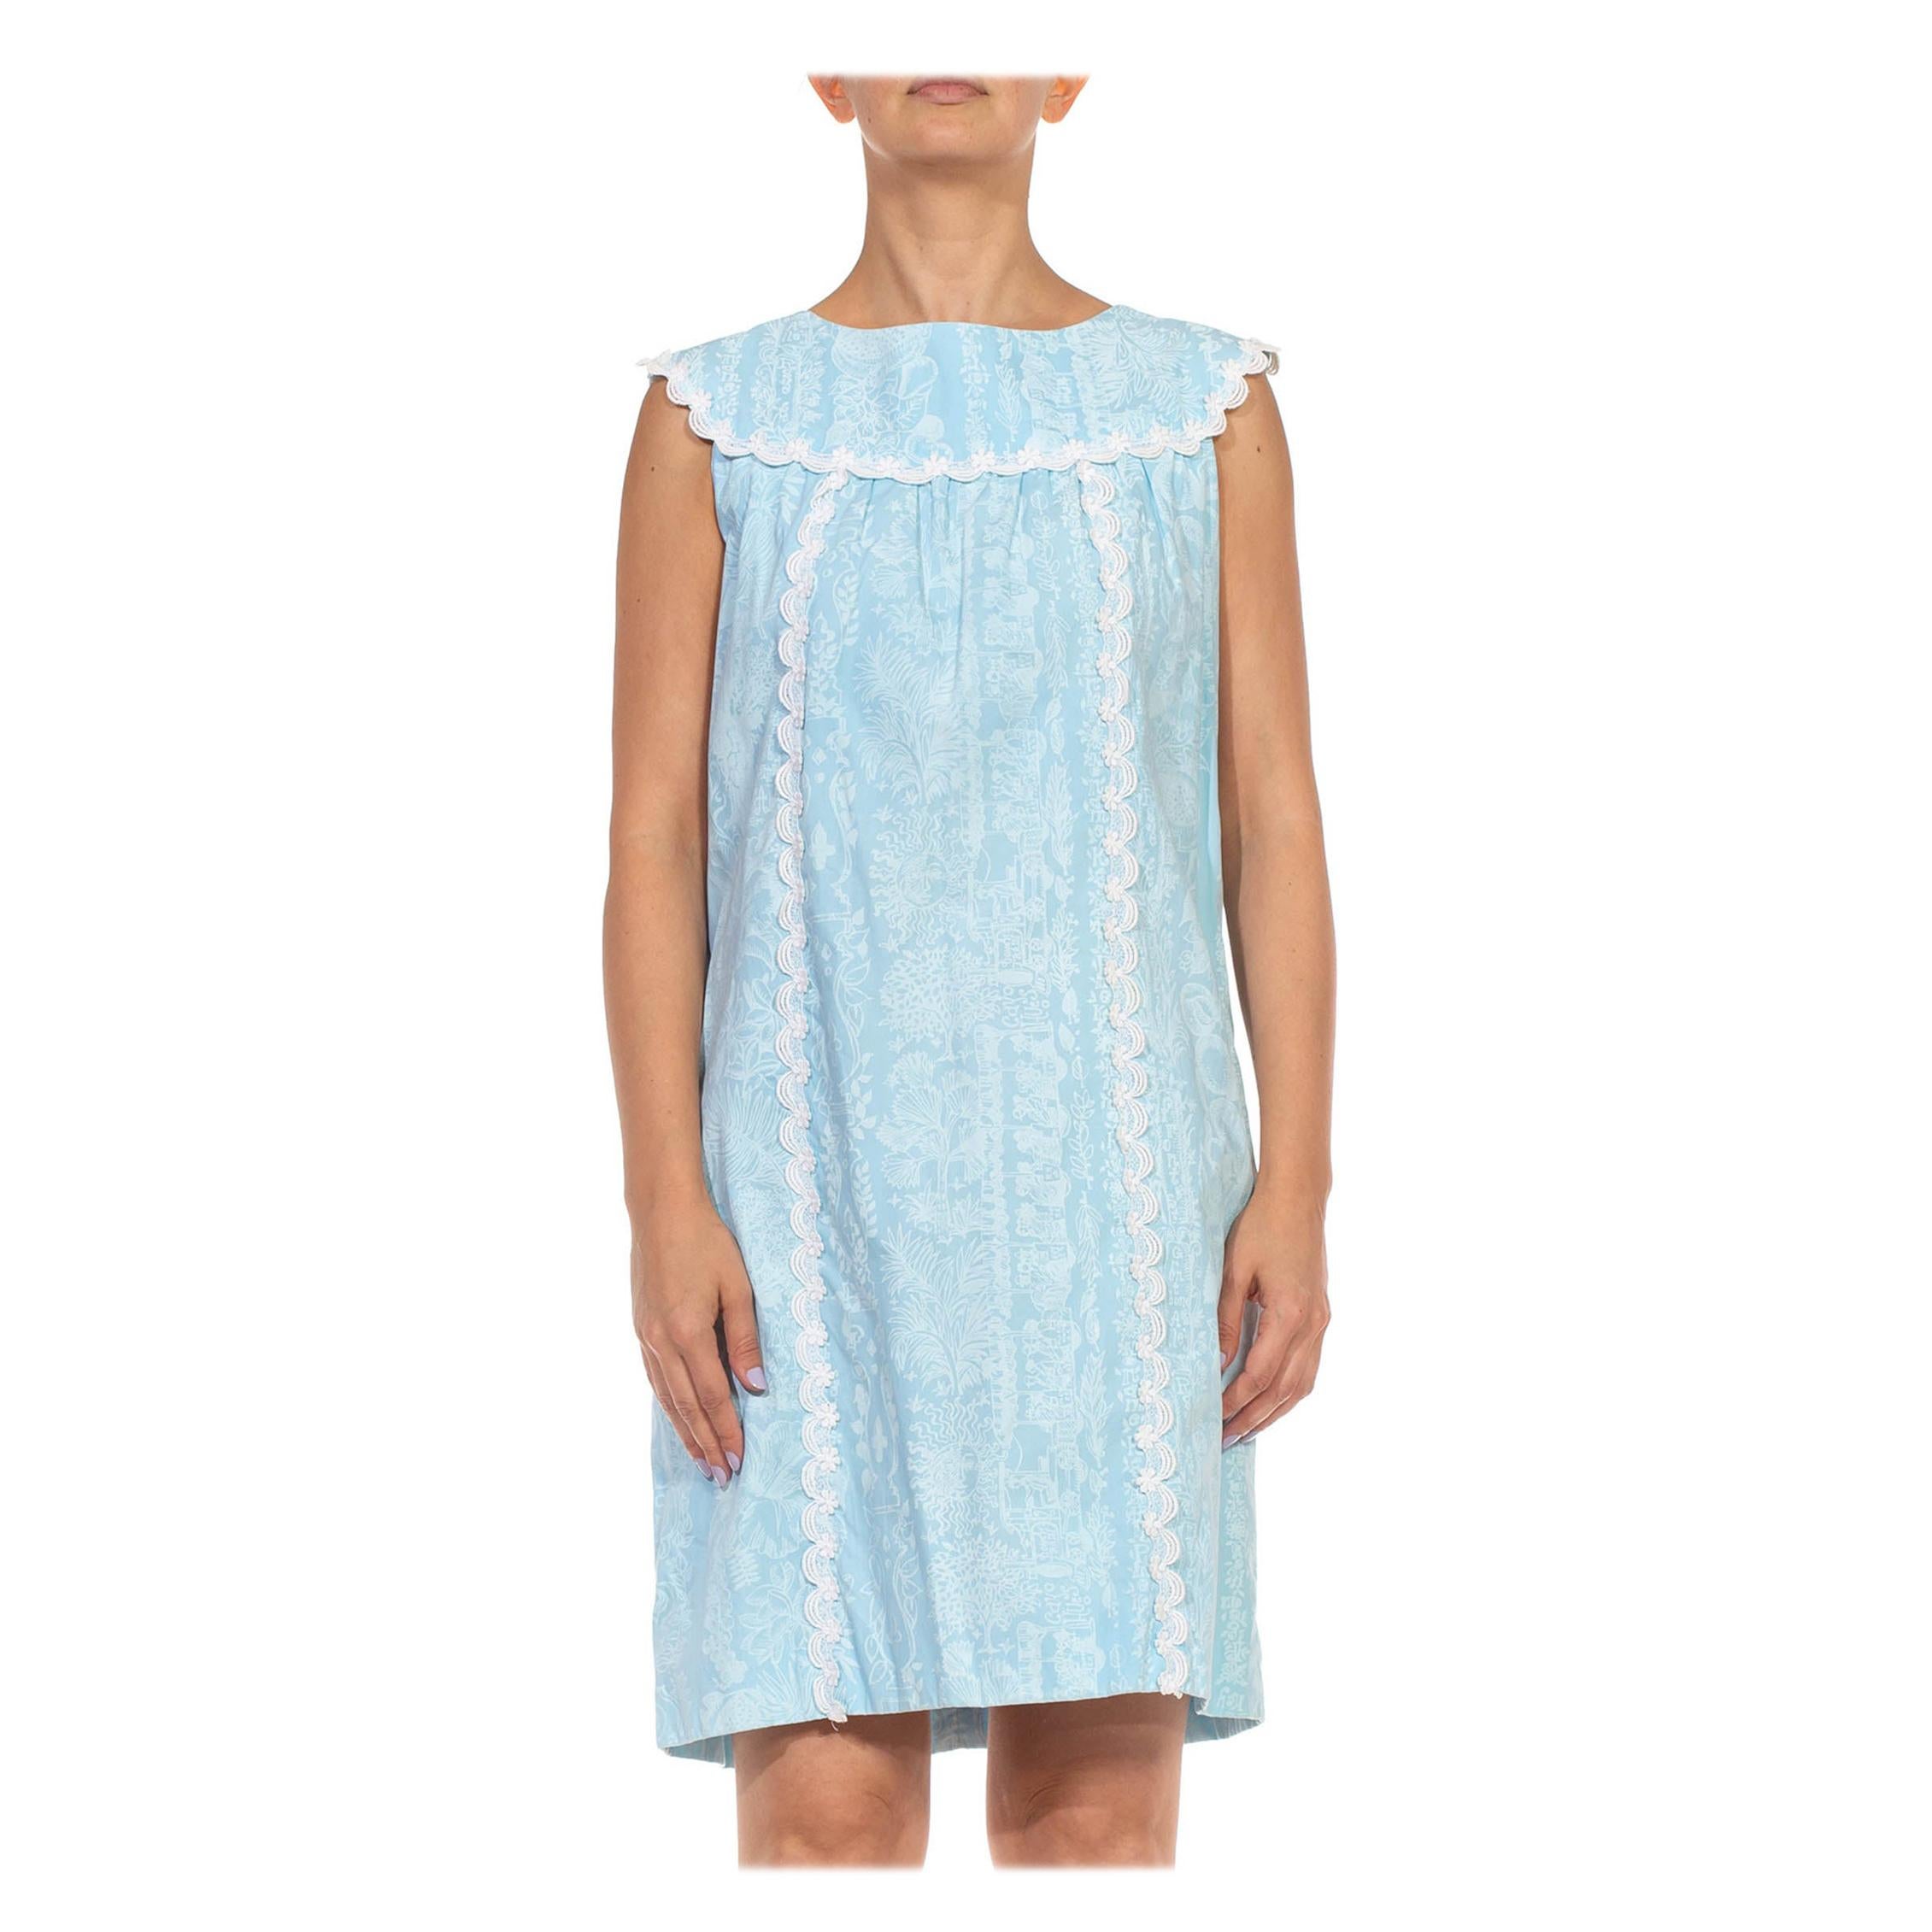 1960S LILLY PULITZER Blue & White Floral Organic Cotton Lace Sleveless Dress For Sale